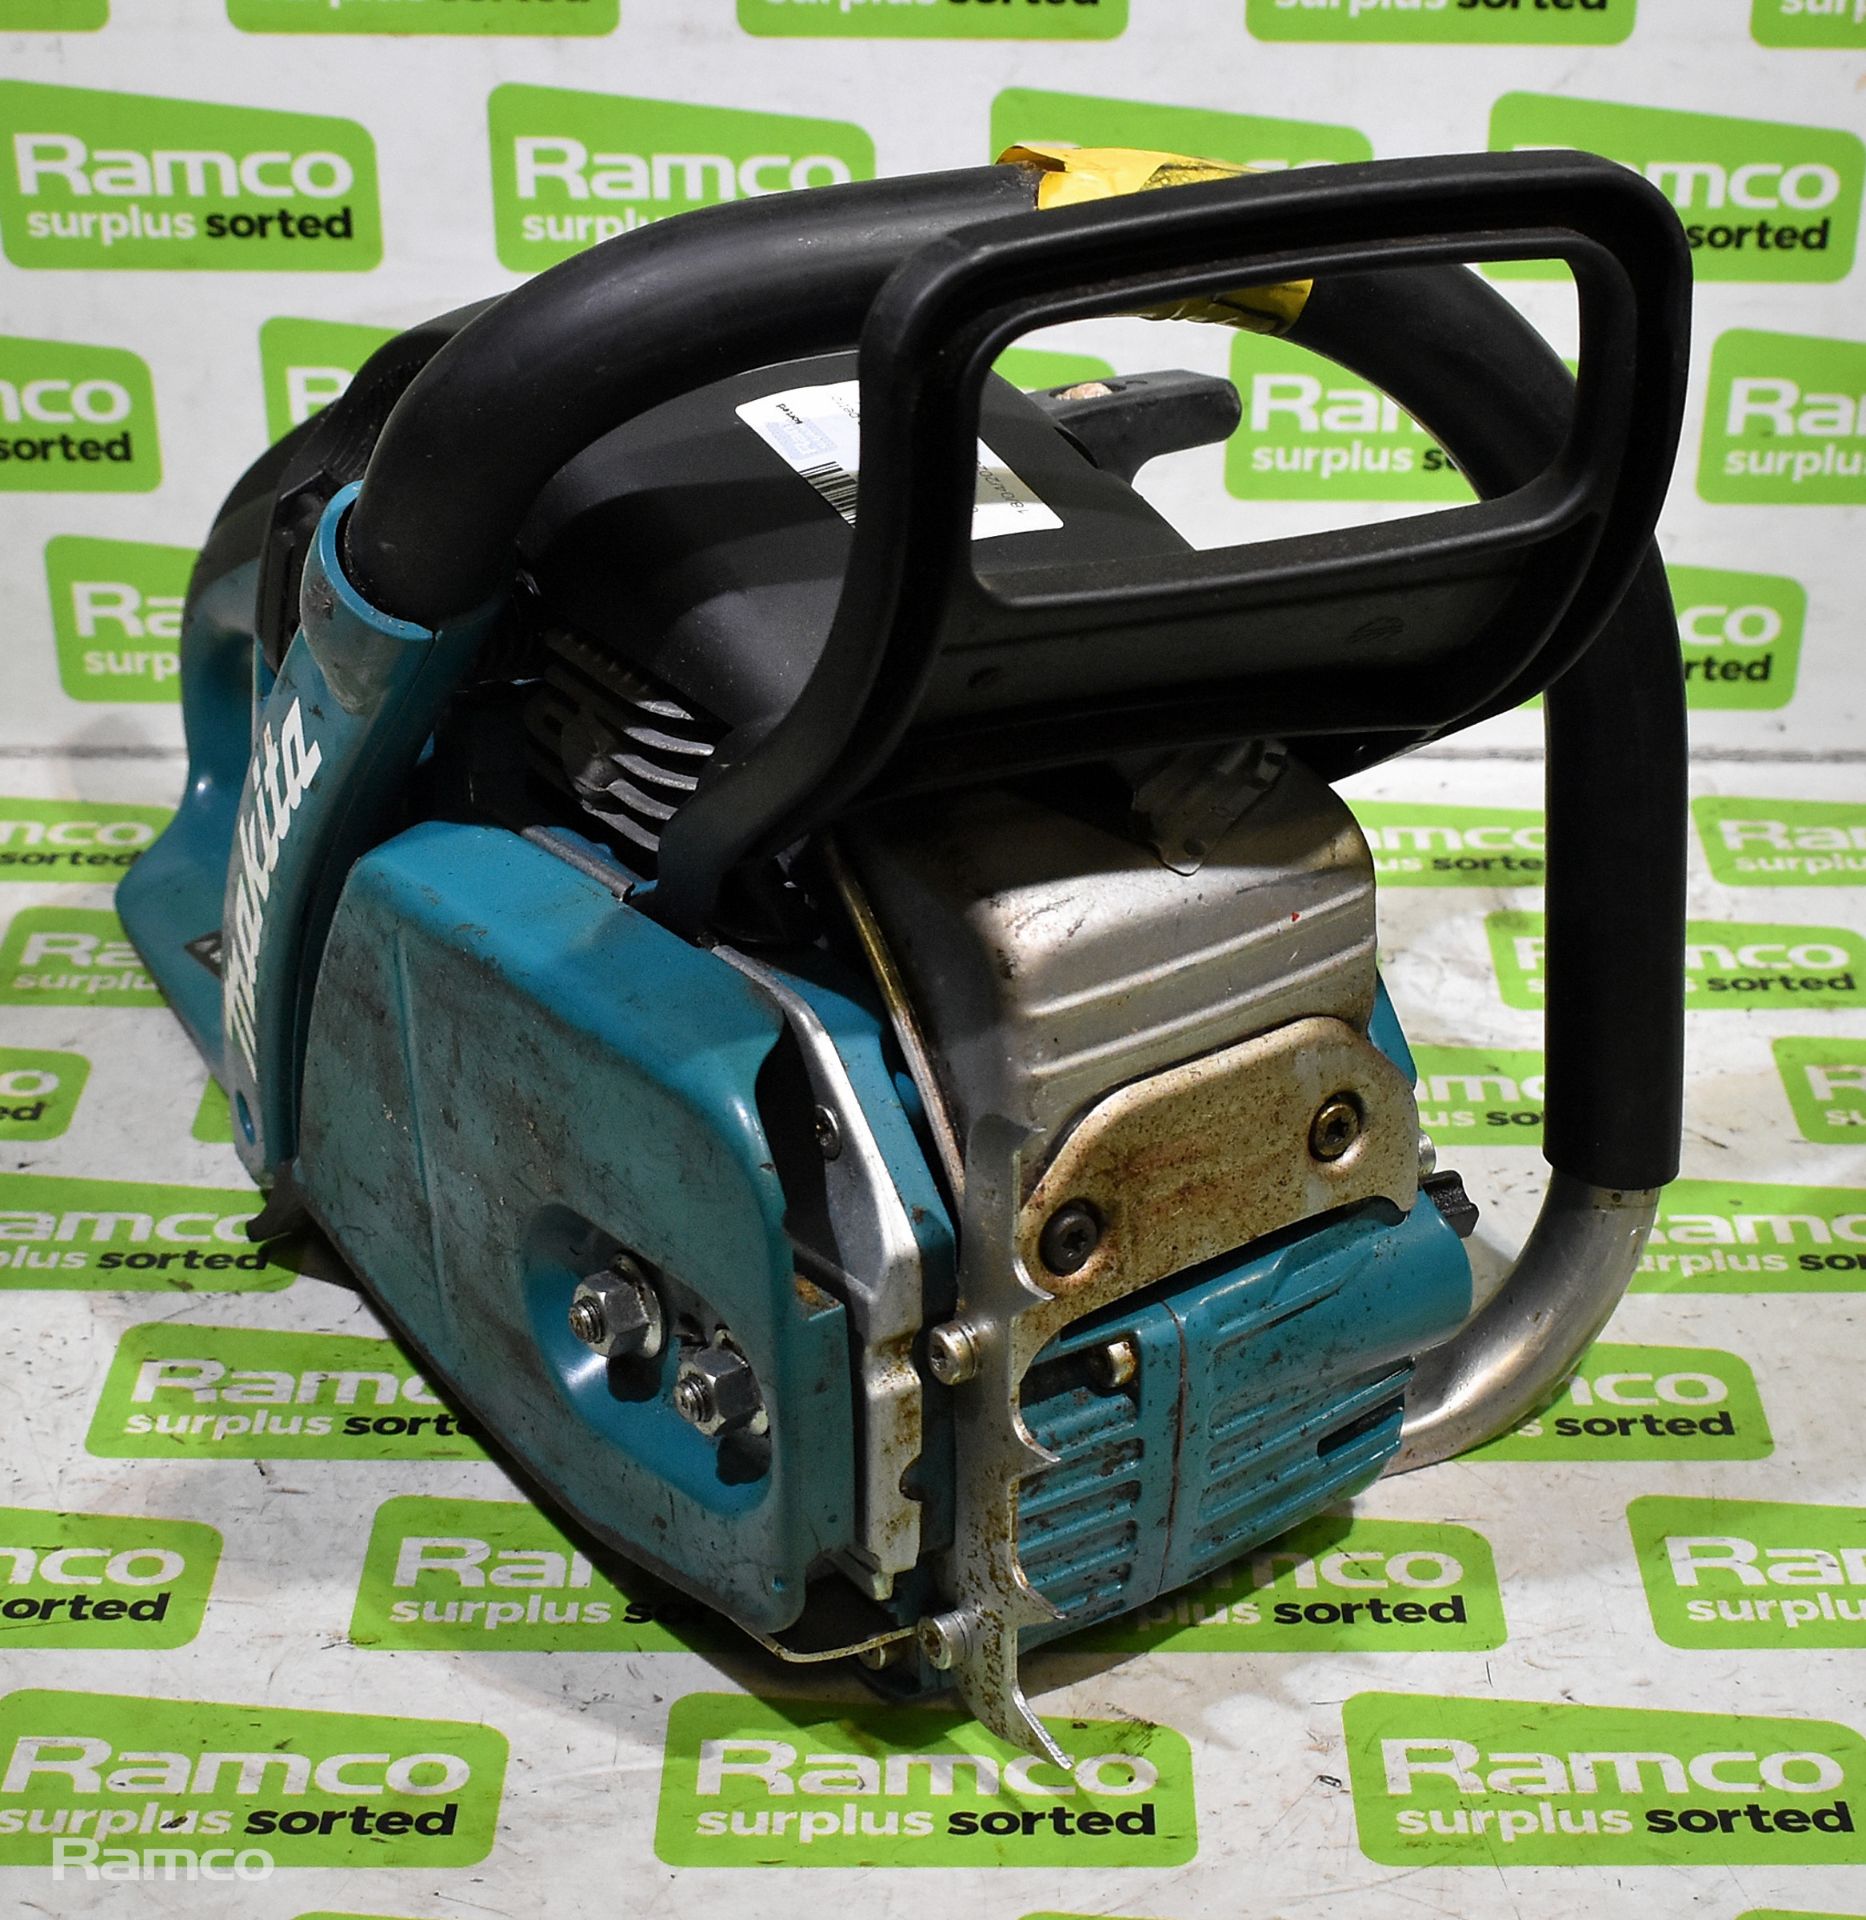 Makita DCS5030 50cc petrol chainsaw - BODY ONLY - Image 5 of 6